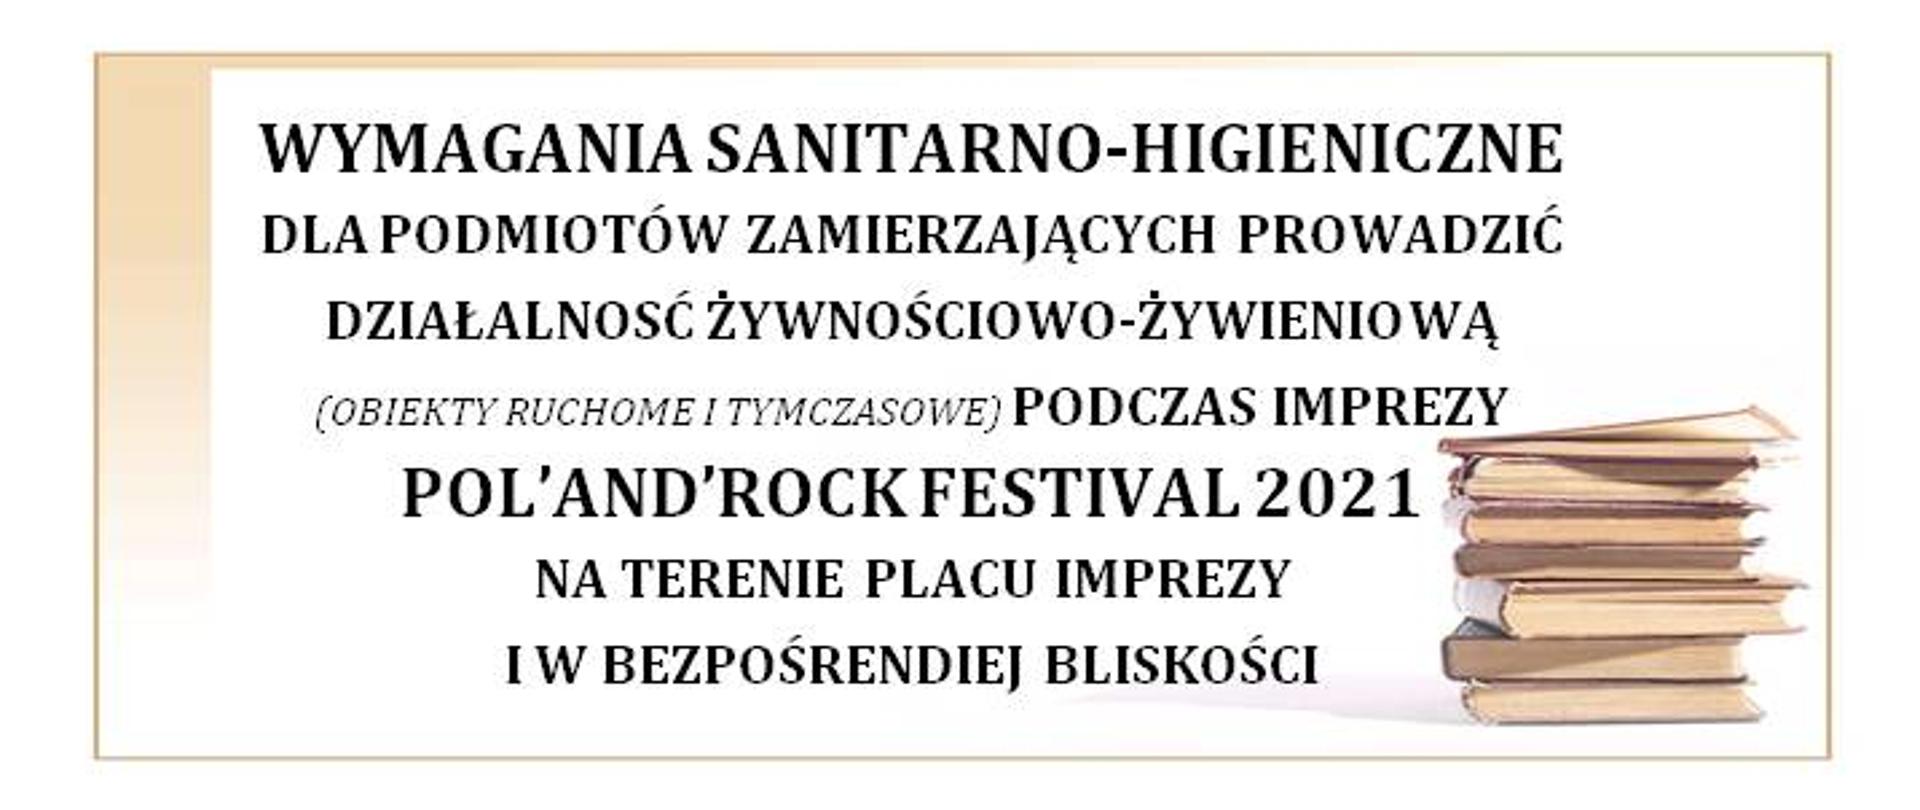 POL’AND’ROCK FESTIVAL 2021 